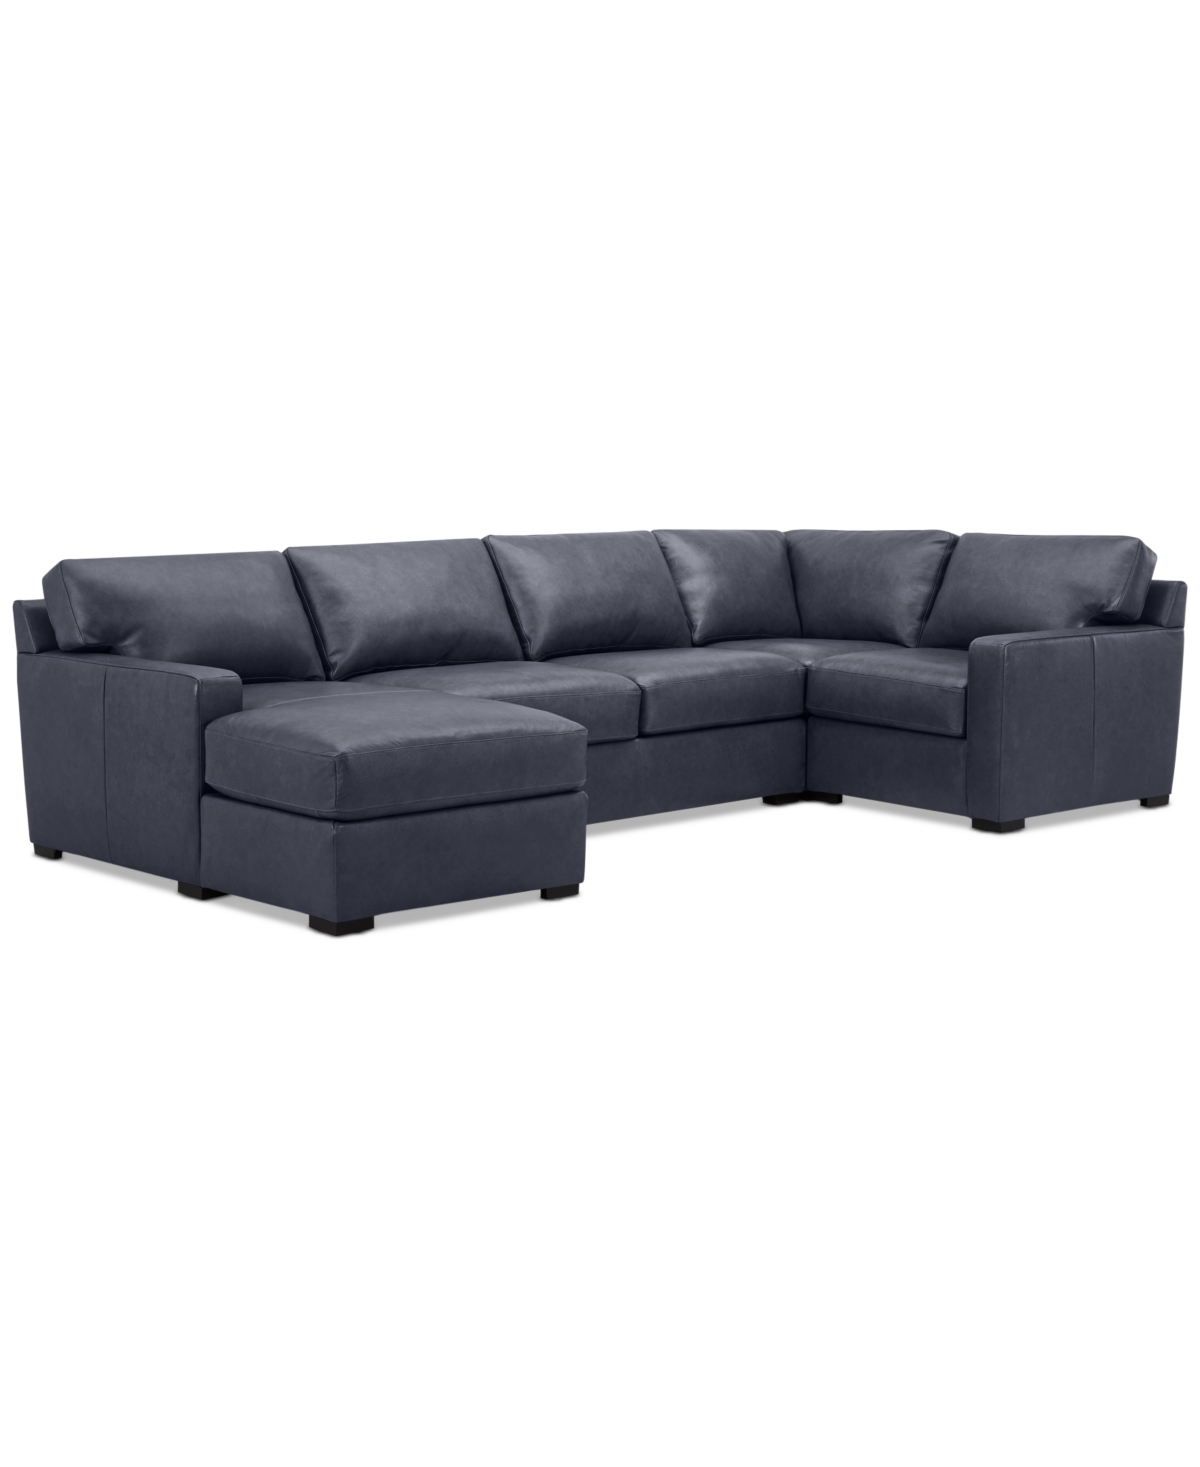 Macy's Radley 136" 4-pc. Leather Square Corner Modular Chaise Sectional, Created For  In Slate Grey